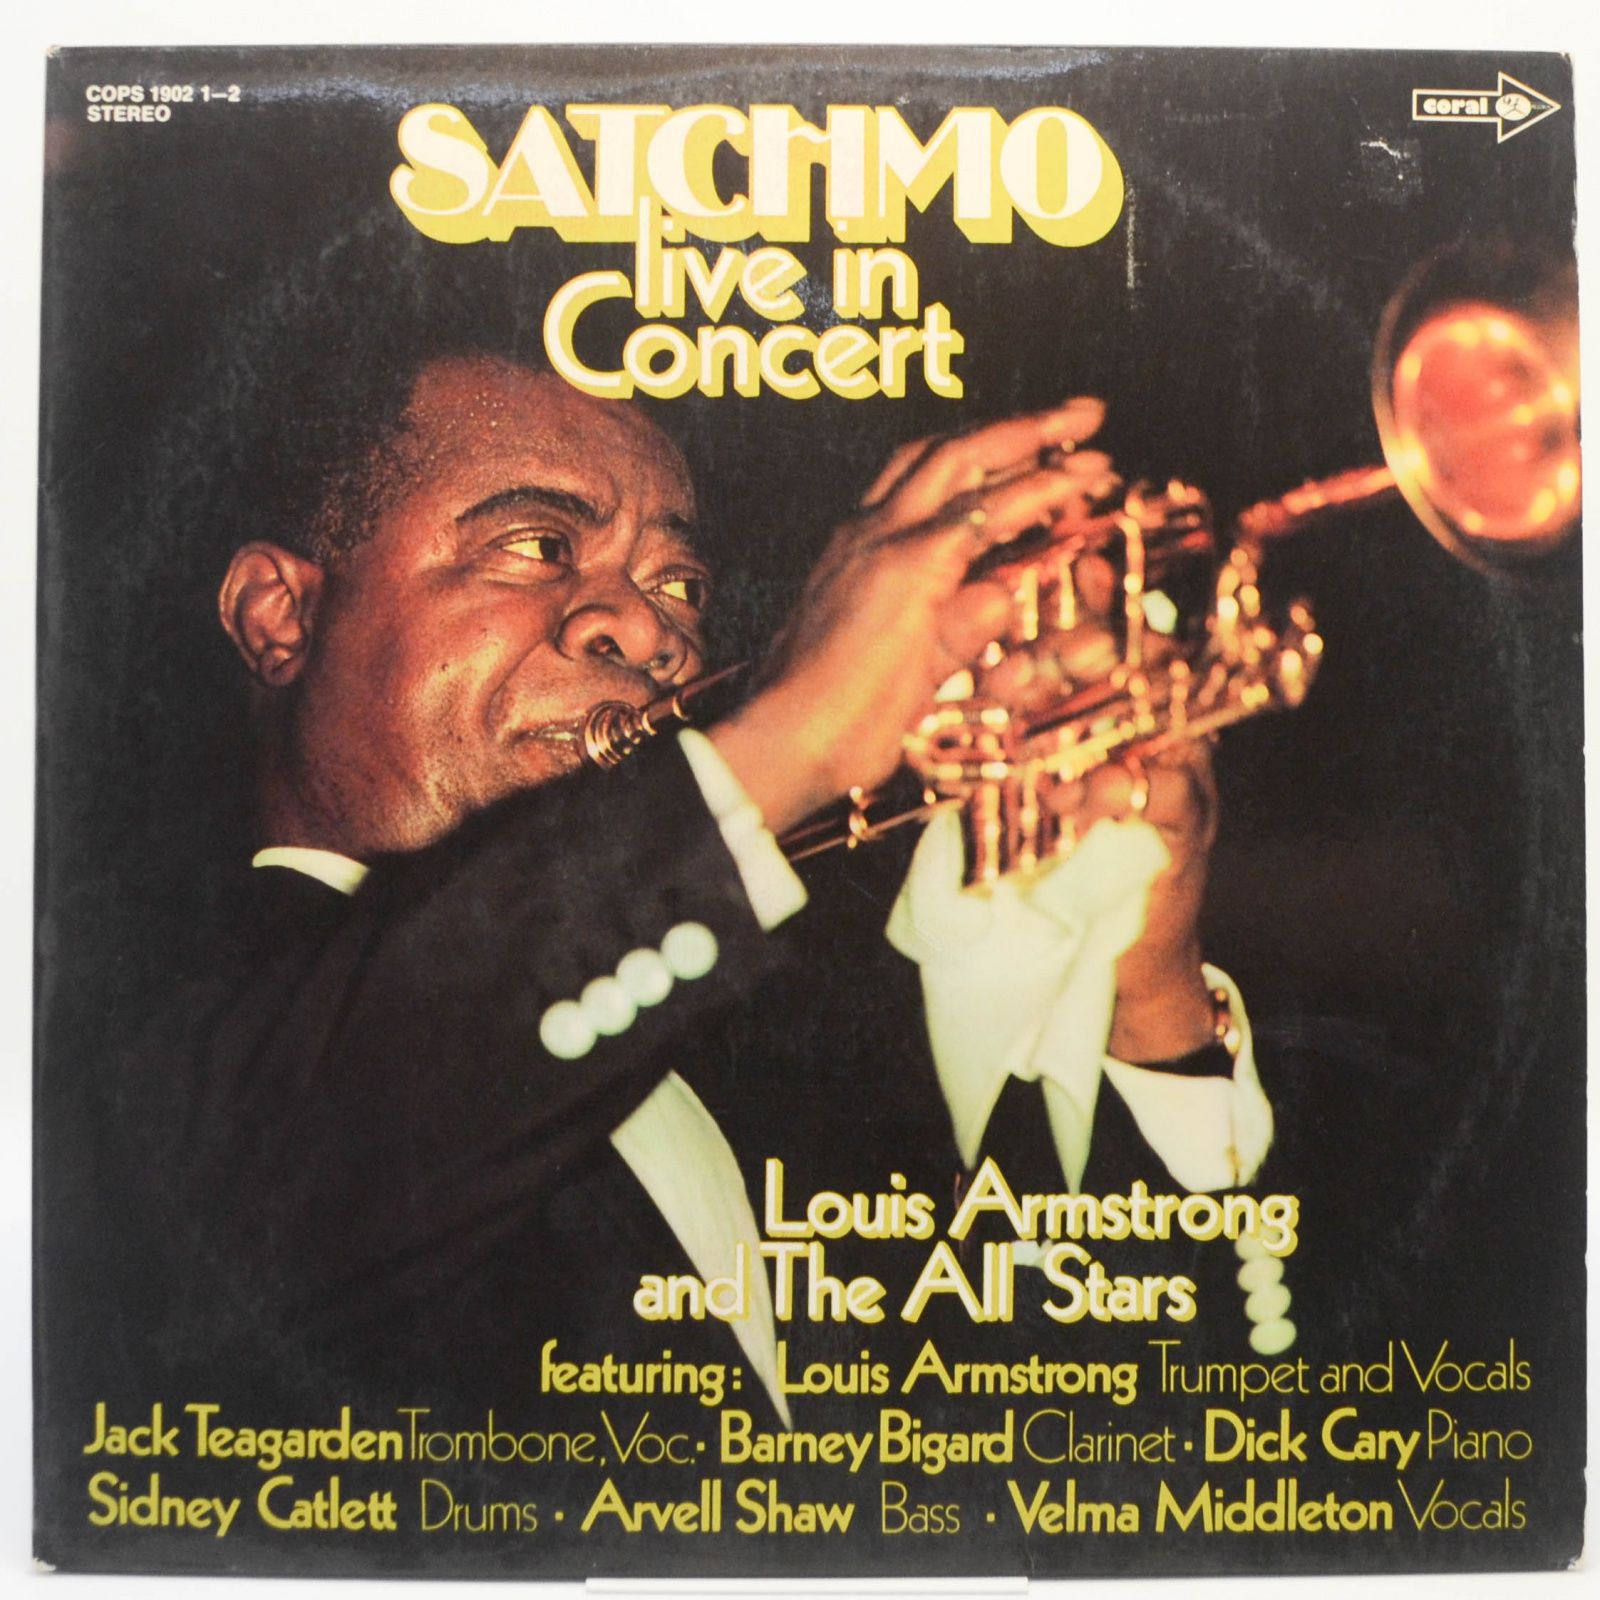 Satchmo Live In Concert (2LP), 1951